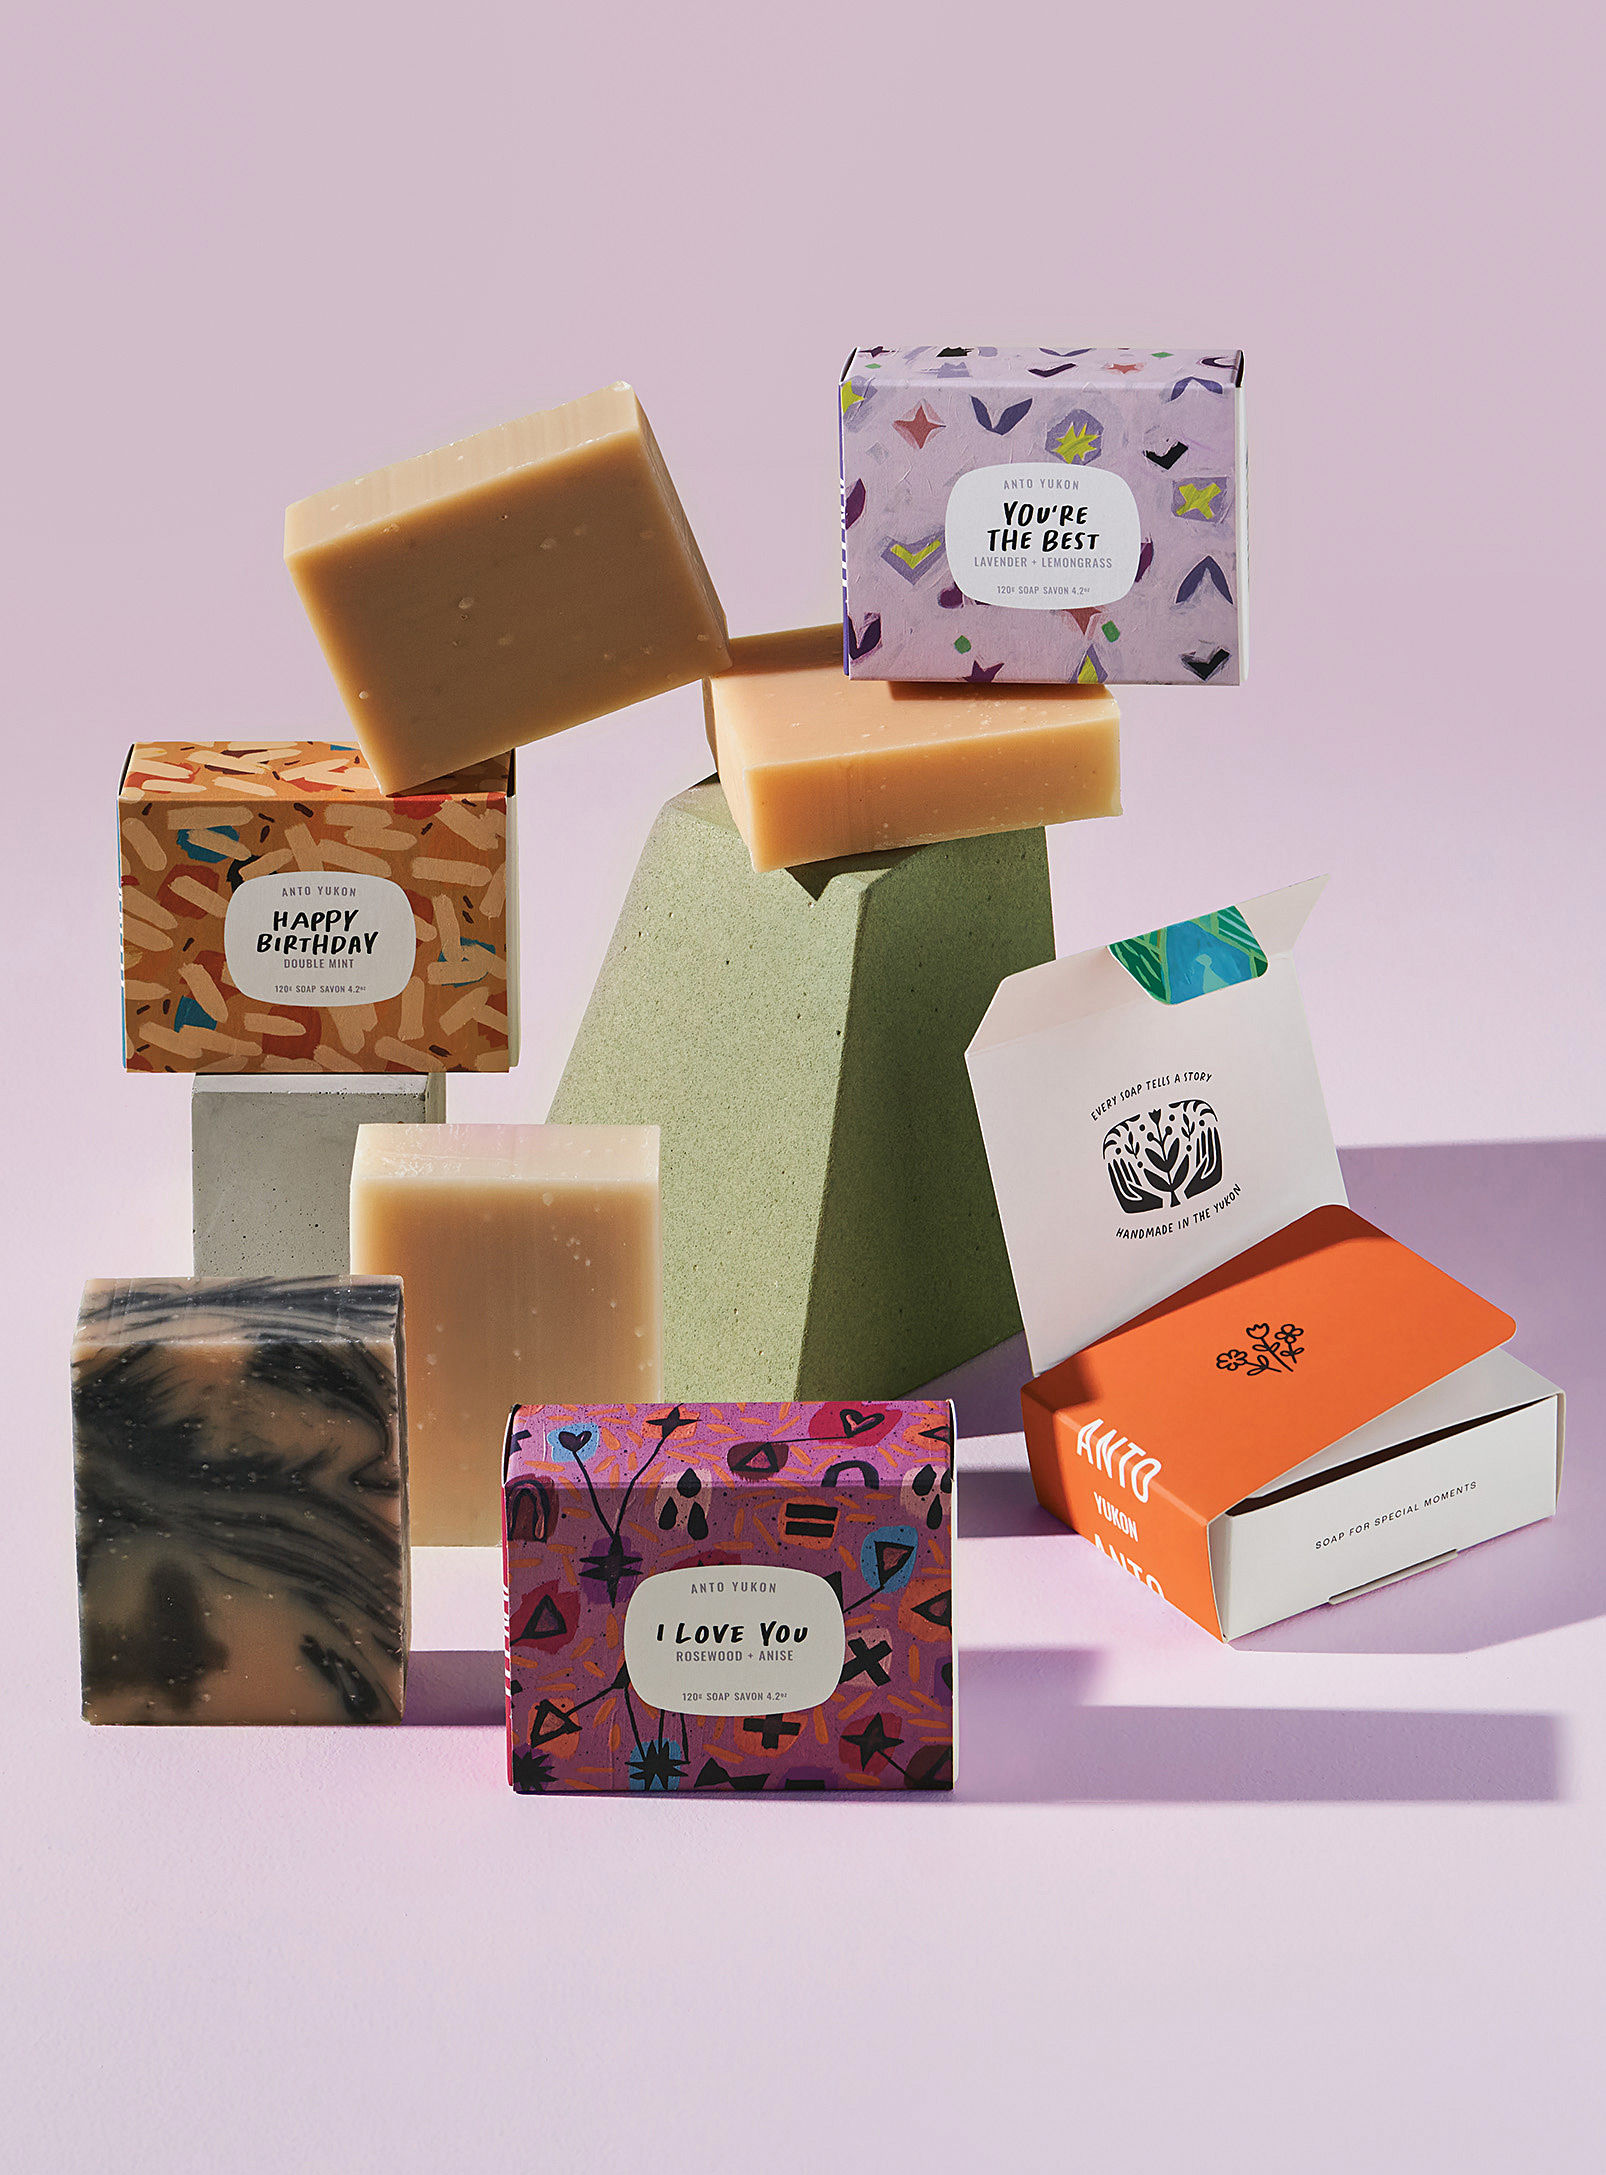 Anto Yukon - Expressions soap set In collaboration with artist Meghan Hildebrand